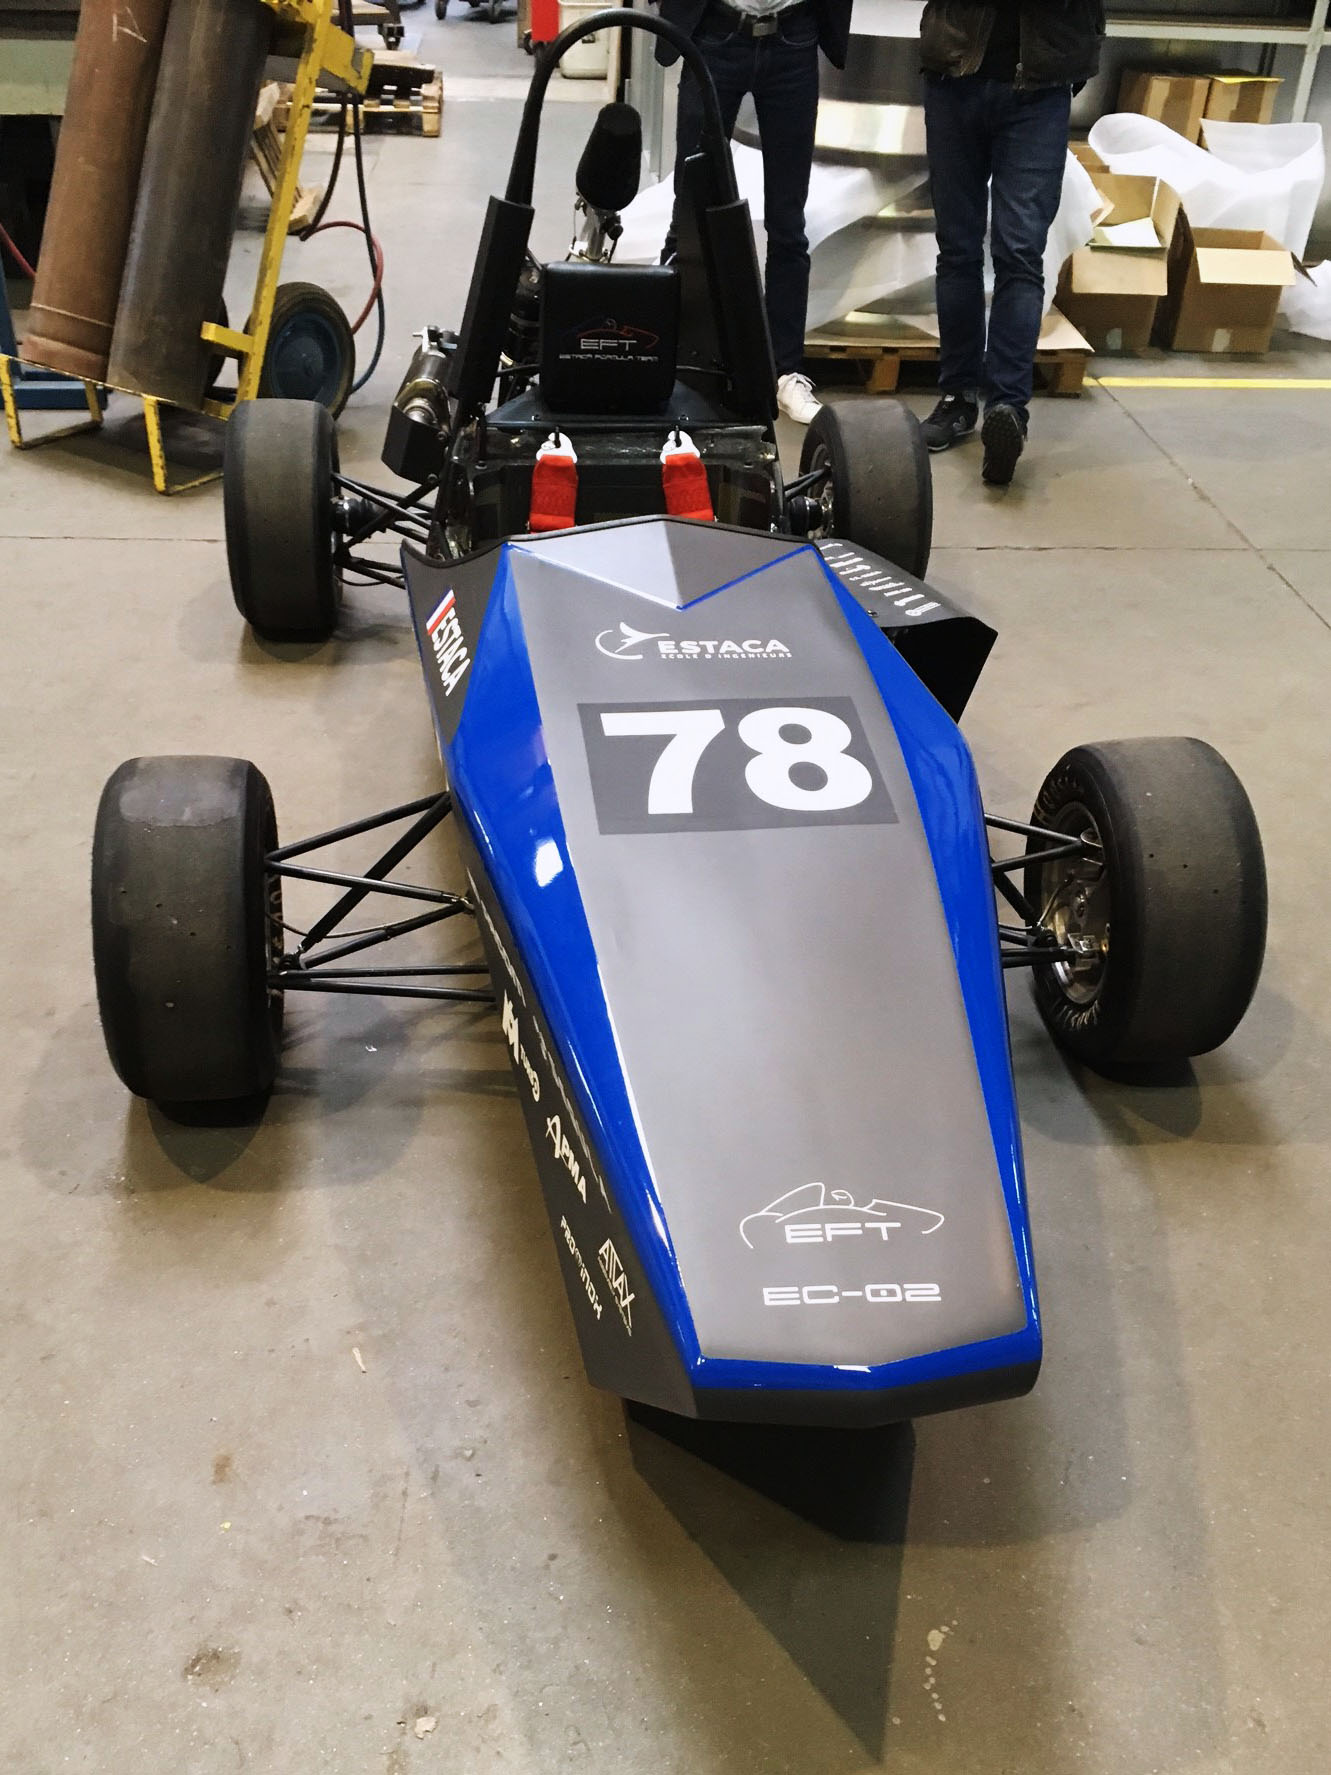 VENTANA Argenteuil teams up with the ESTACA engineering school for the ‘Formula Student Challenge’